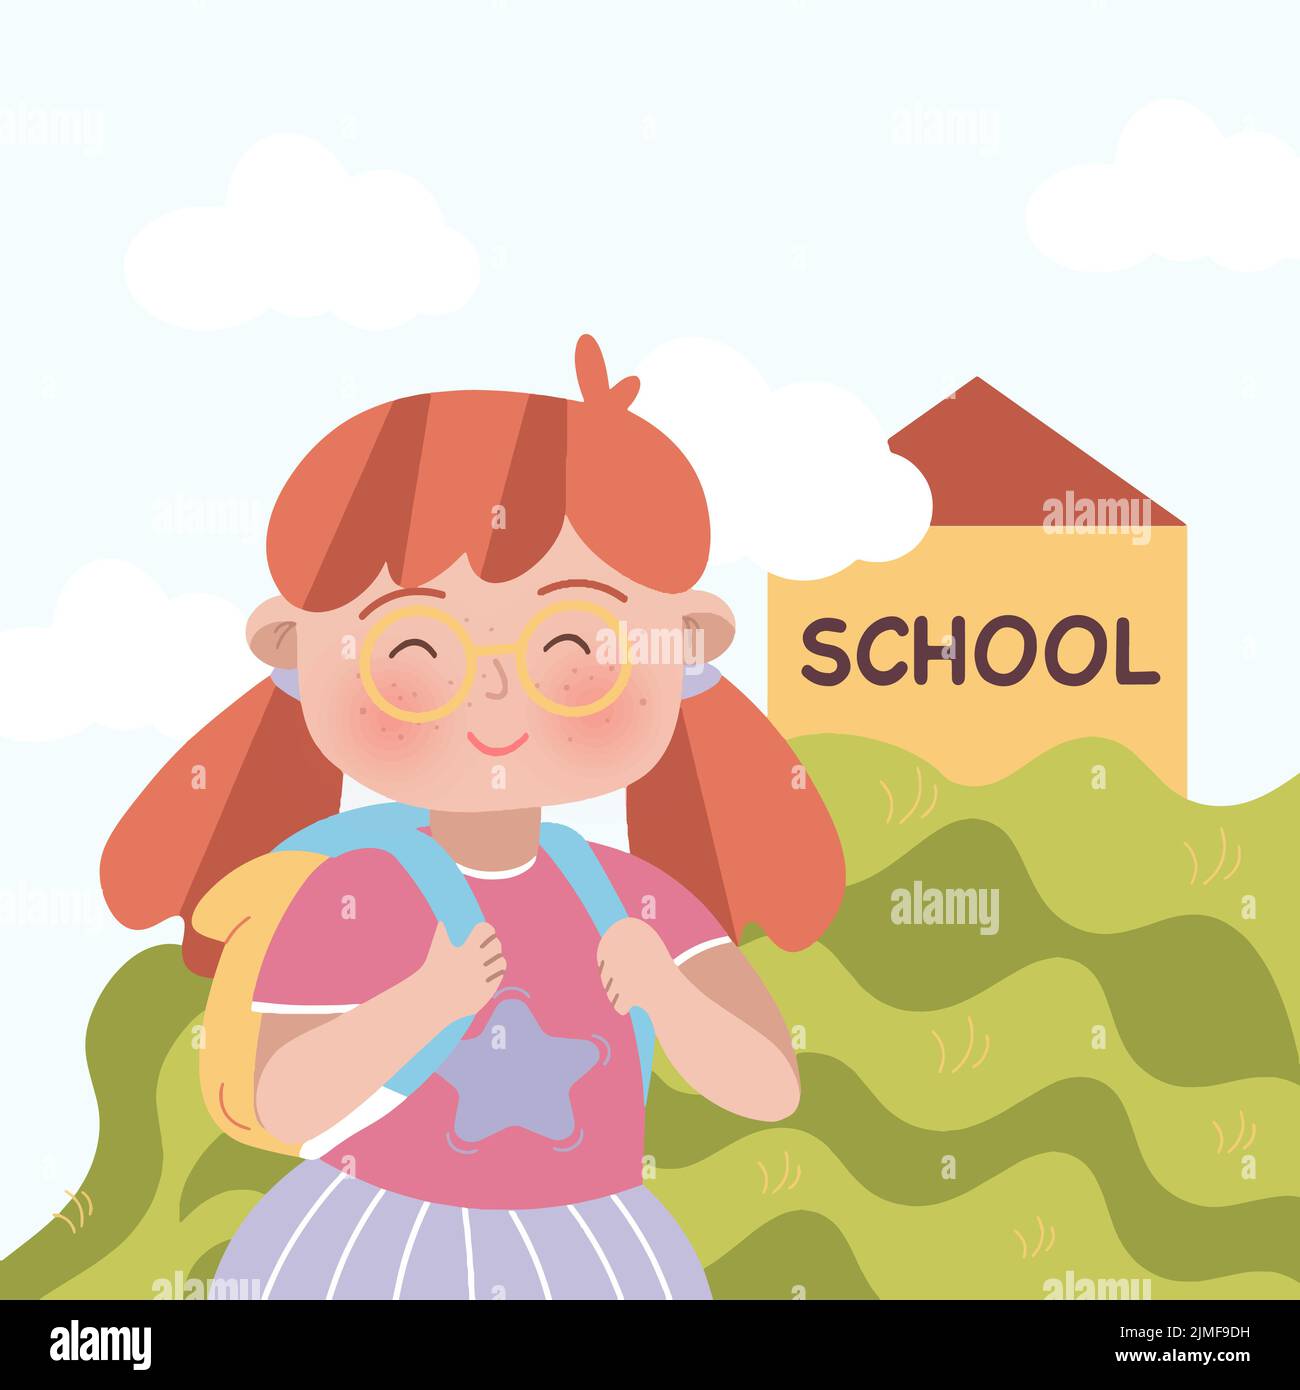 a girl with red hair stands against the background of the school flat illustration Stock Vector